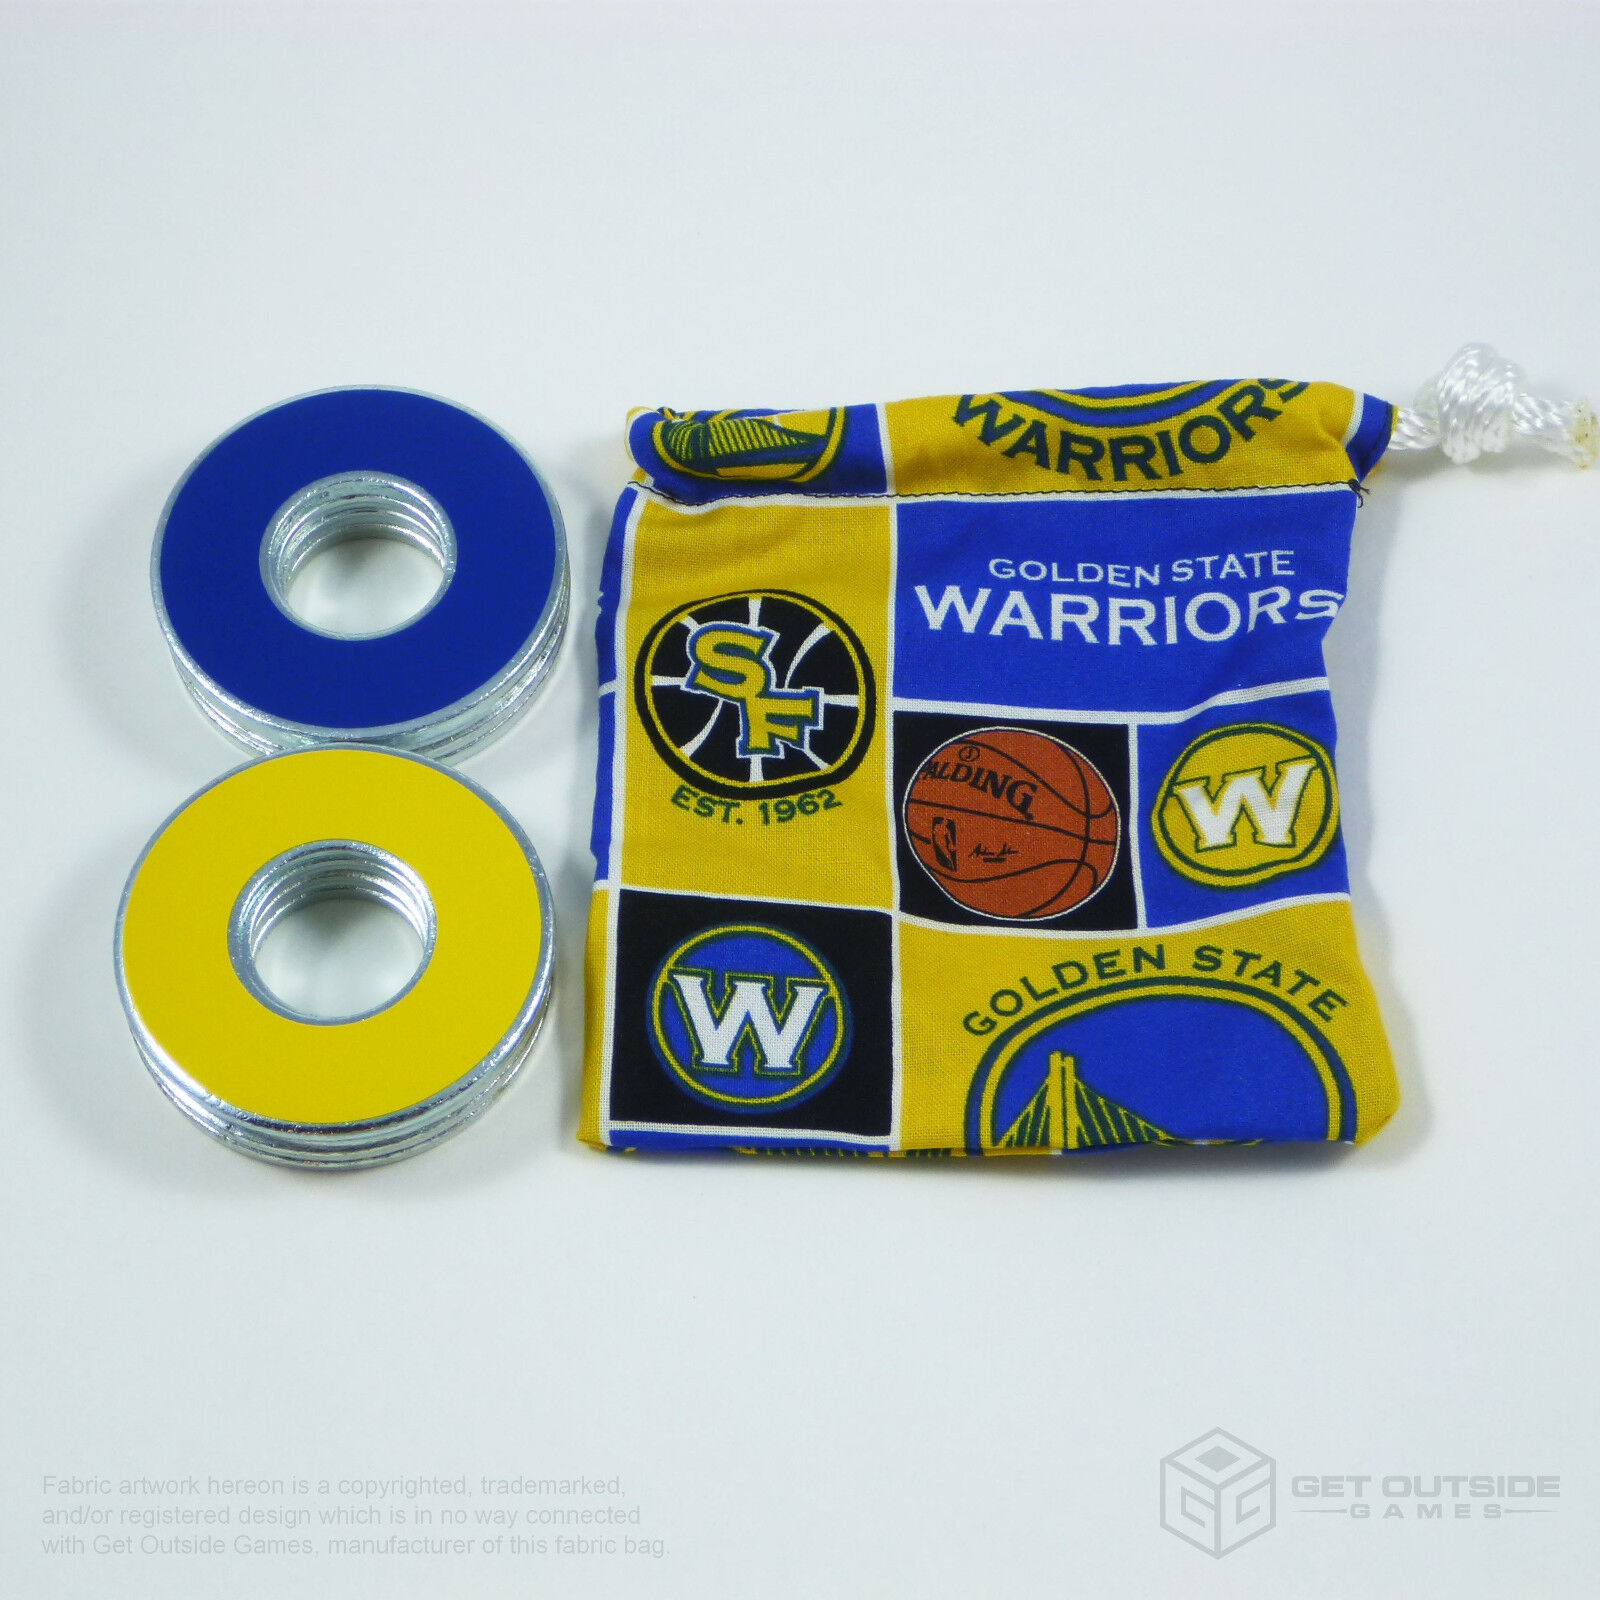 8 VVashers™ w Golden State Warriors Weekly update Washer Bag Toss Max 74% OFF Fabric